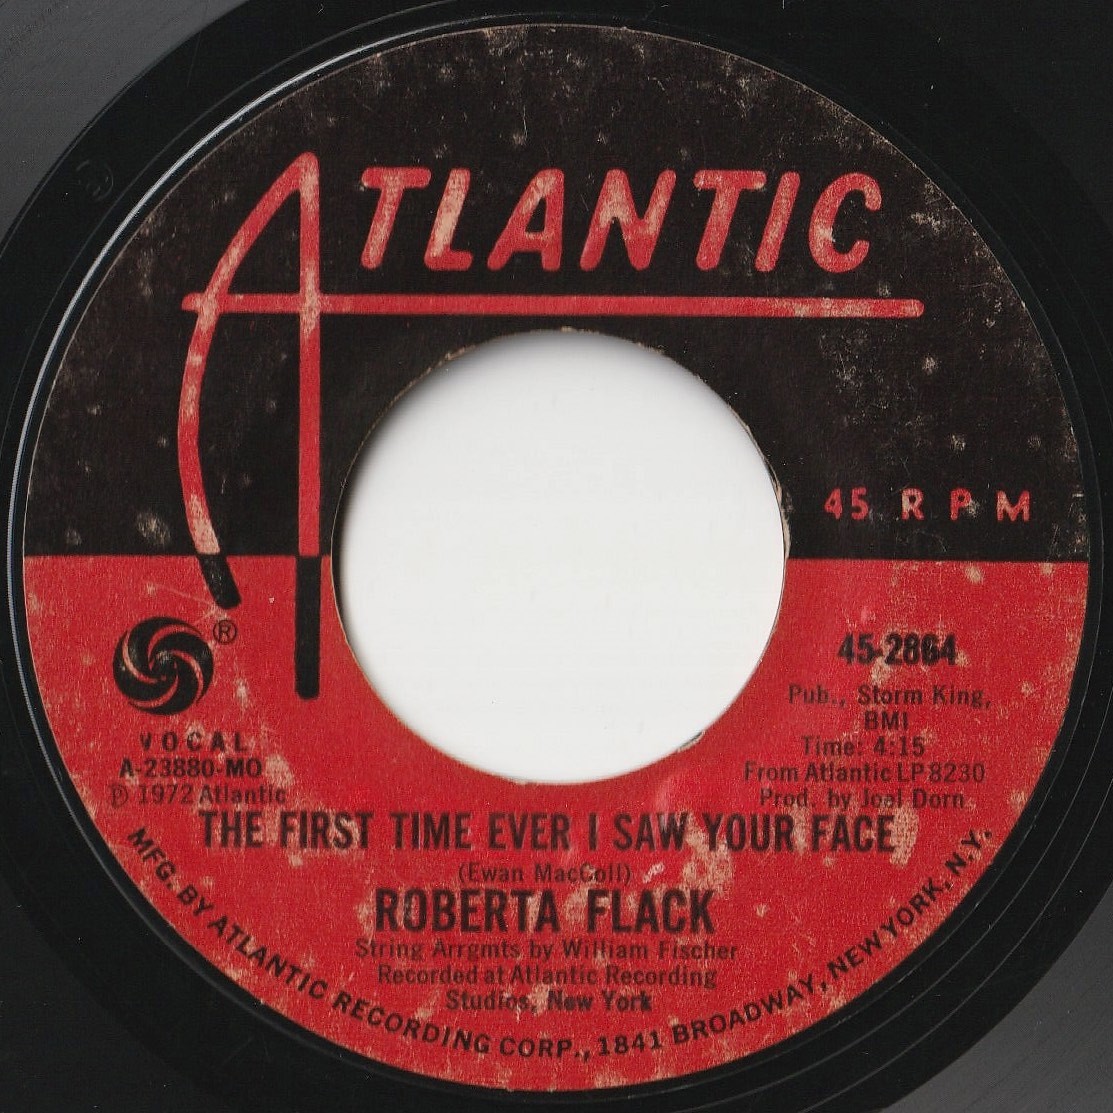 Roberta Flack The First Time Ever I Saw Your Face / Trade Winds Atlantic US 45-2864 201401 SOUL ソウル レコード 7インチ 45_画像1